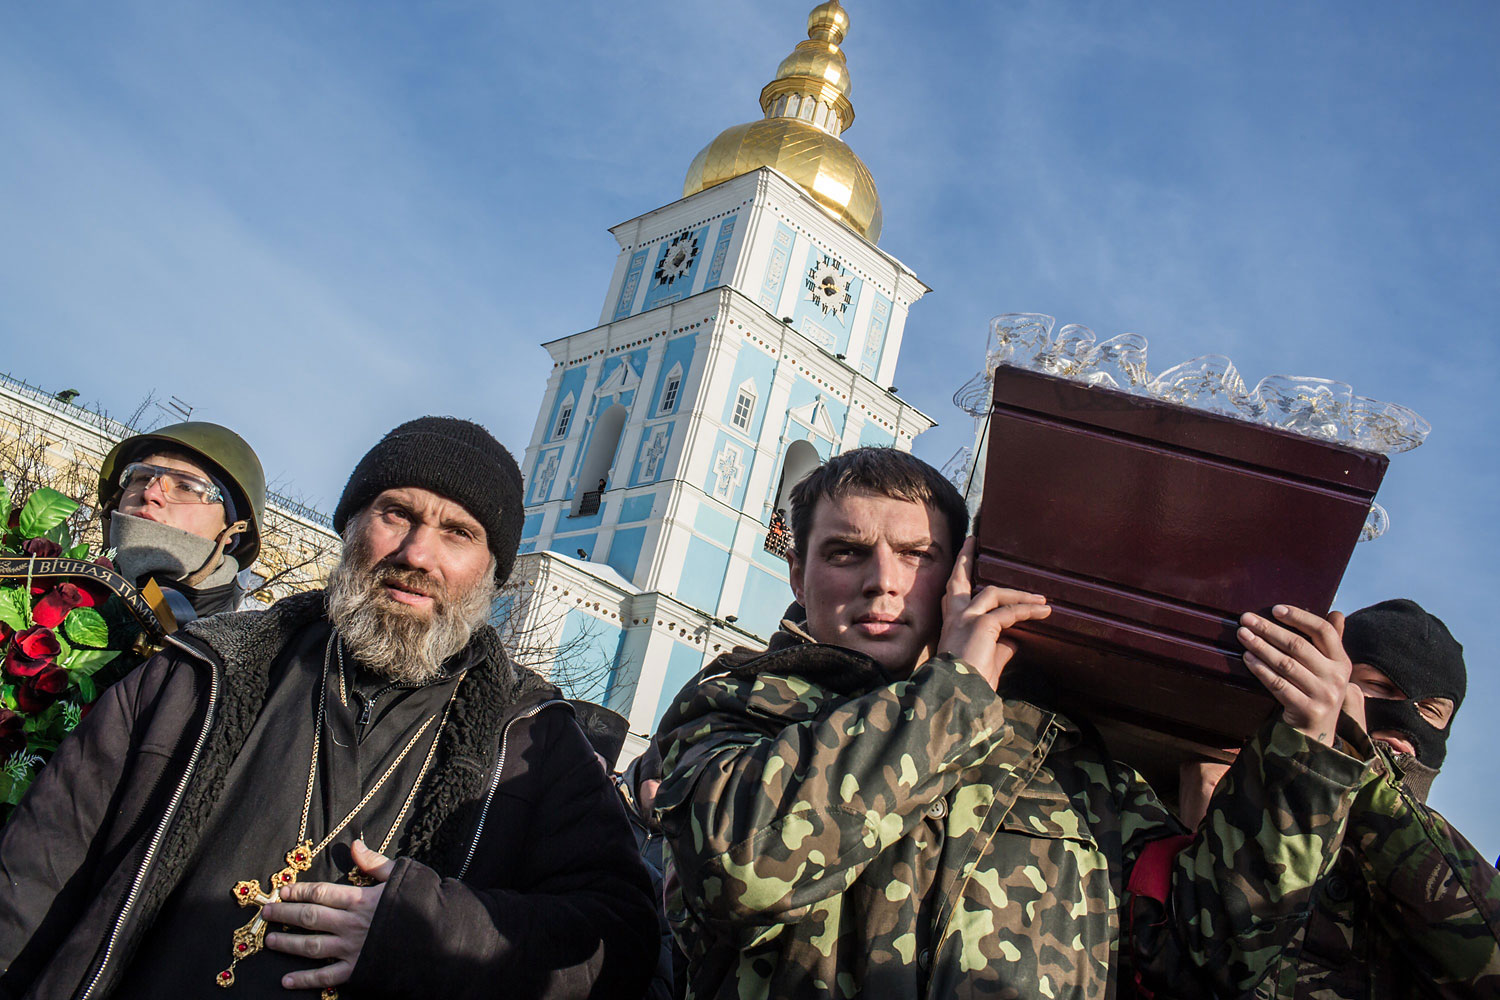 Men carry a casket containing the body of Mikhail Zhiznevsky, 25, an anti-government protester who was killed in clashes with police, outside Mikhailovsky Cathedral after a memorial service there in his honor on Jan. 26, 2014 in Kiev.